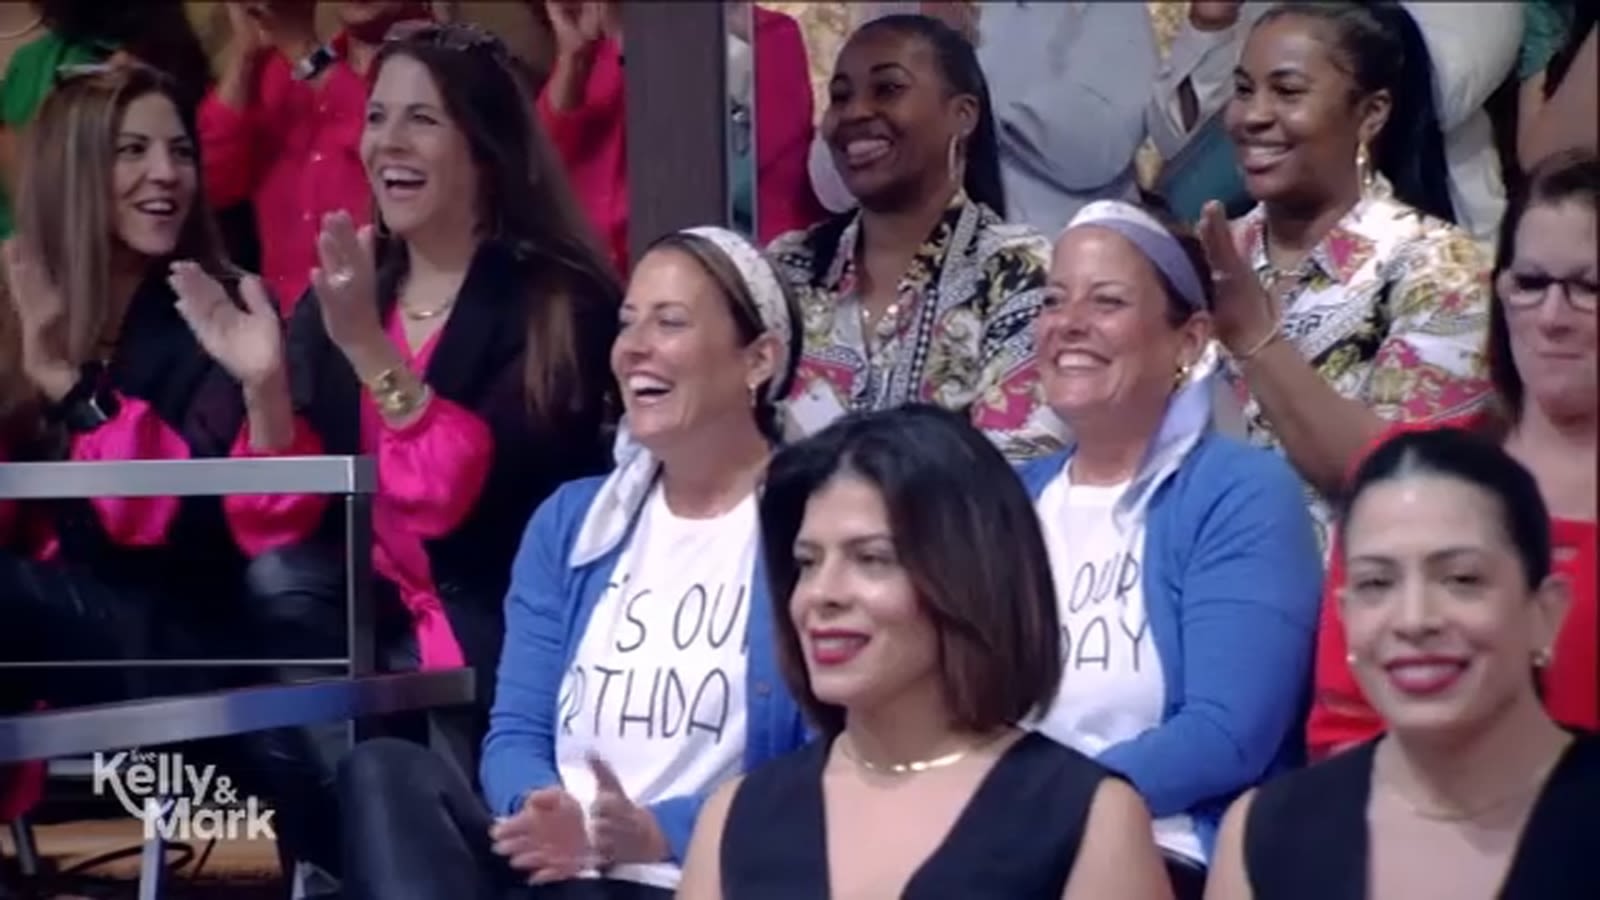 Seeing double: Entire 'Live with Kelly and Mark' audience full of adult identical twins